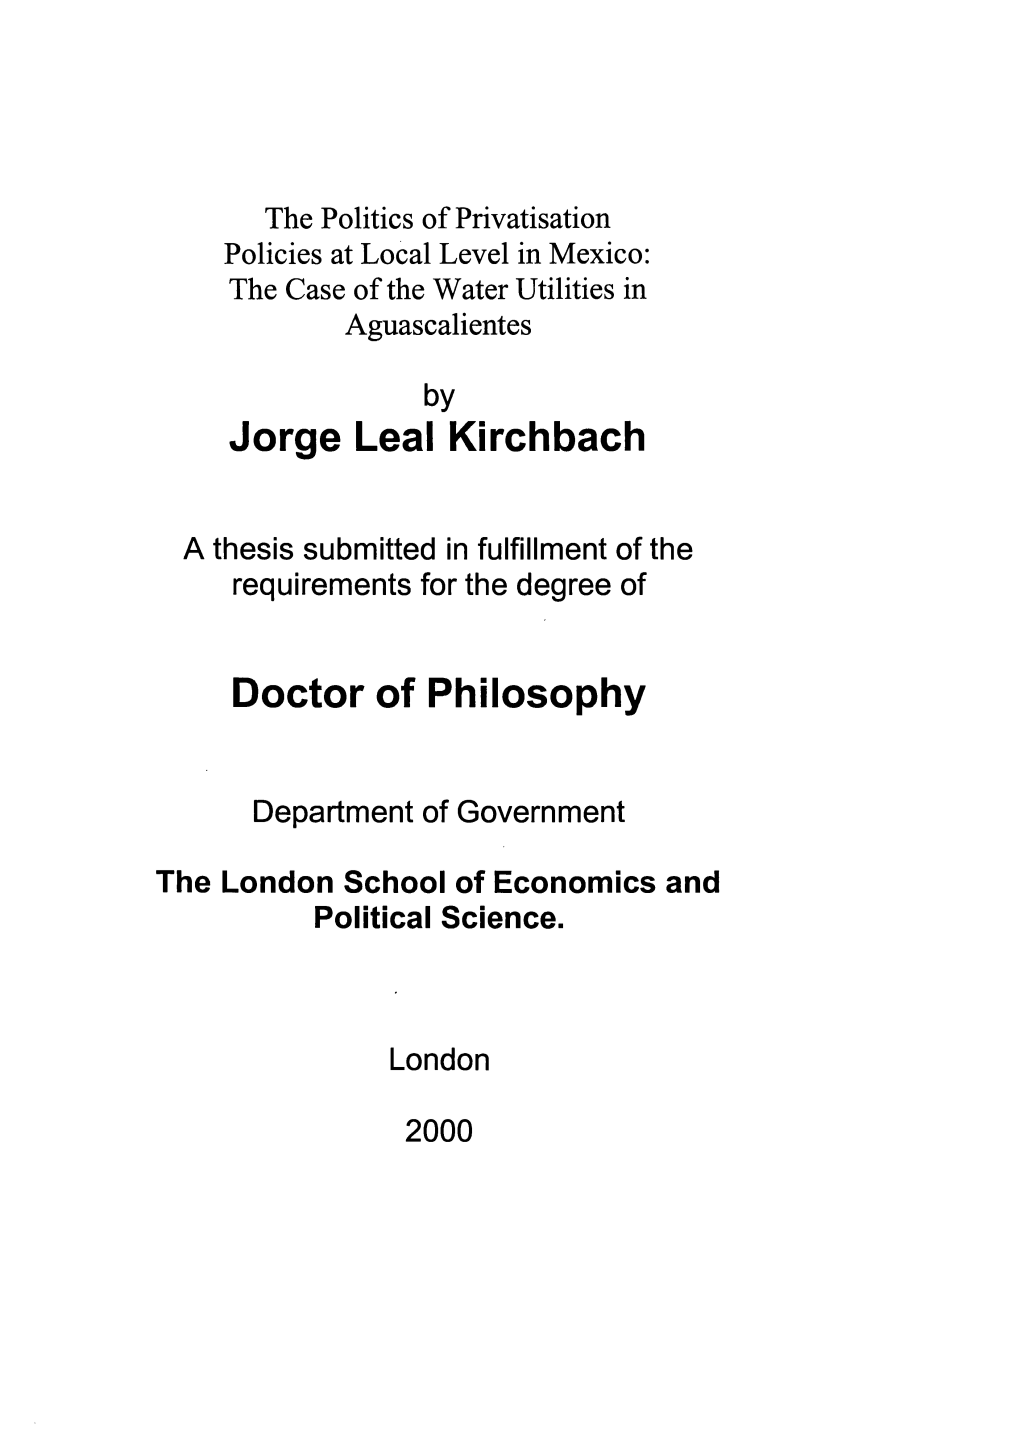 Jorge Leal Kirchbach Doctor of Philosophy